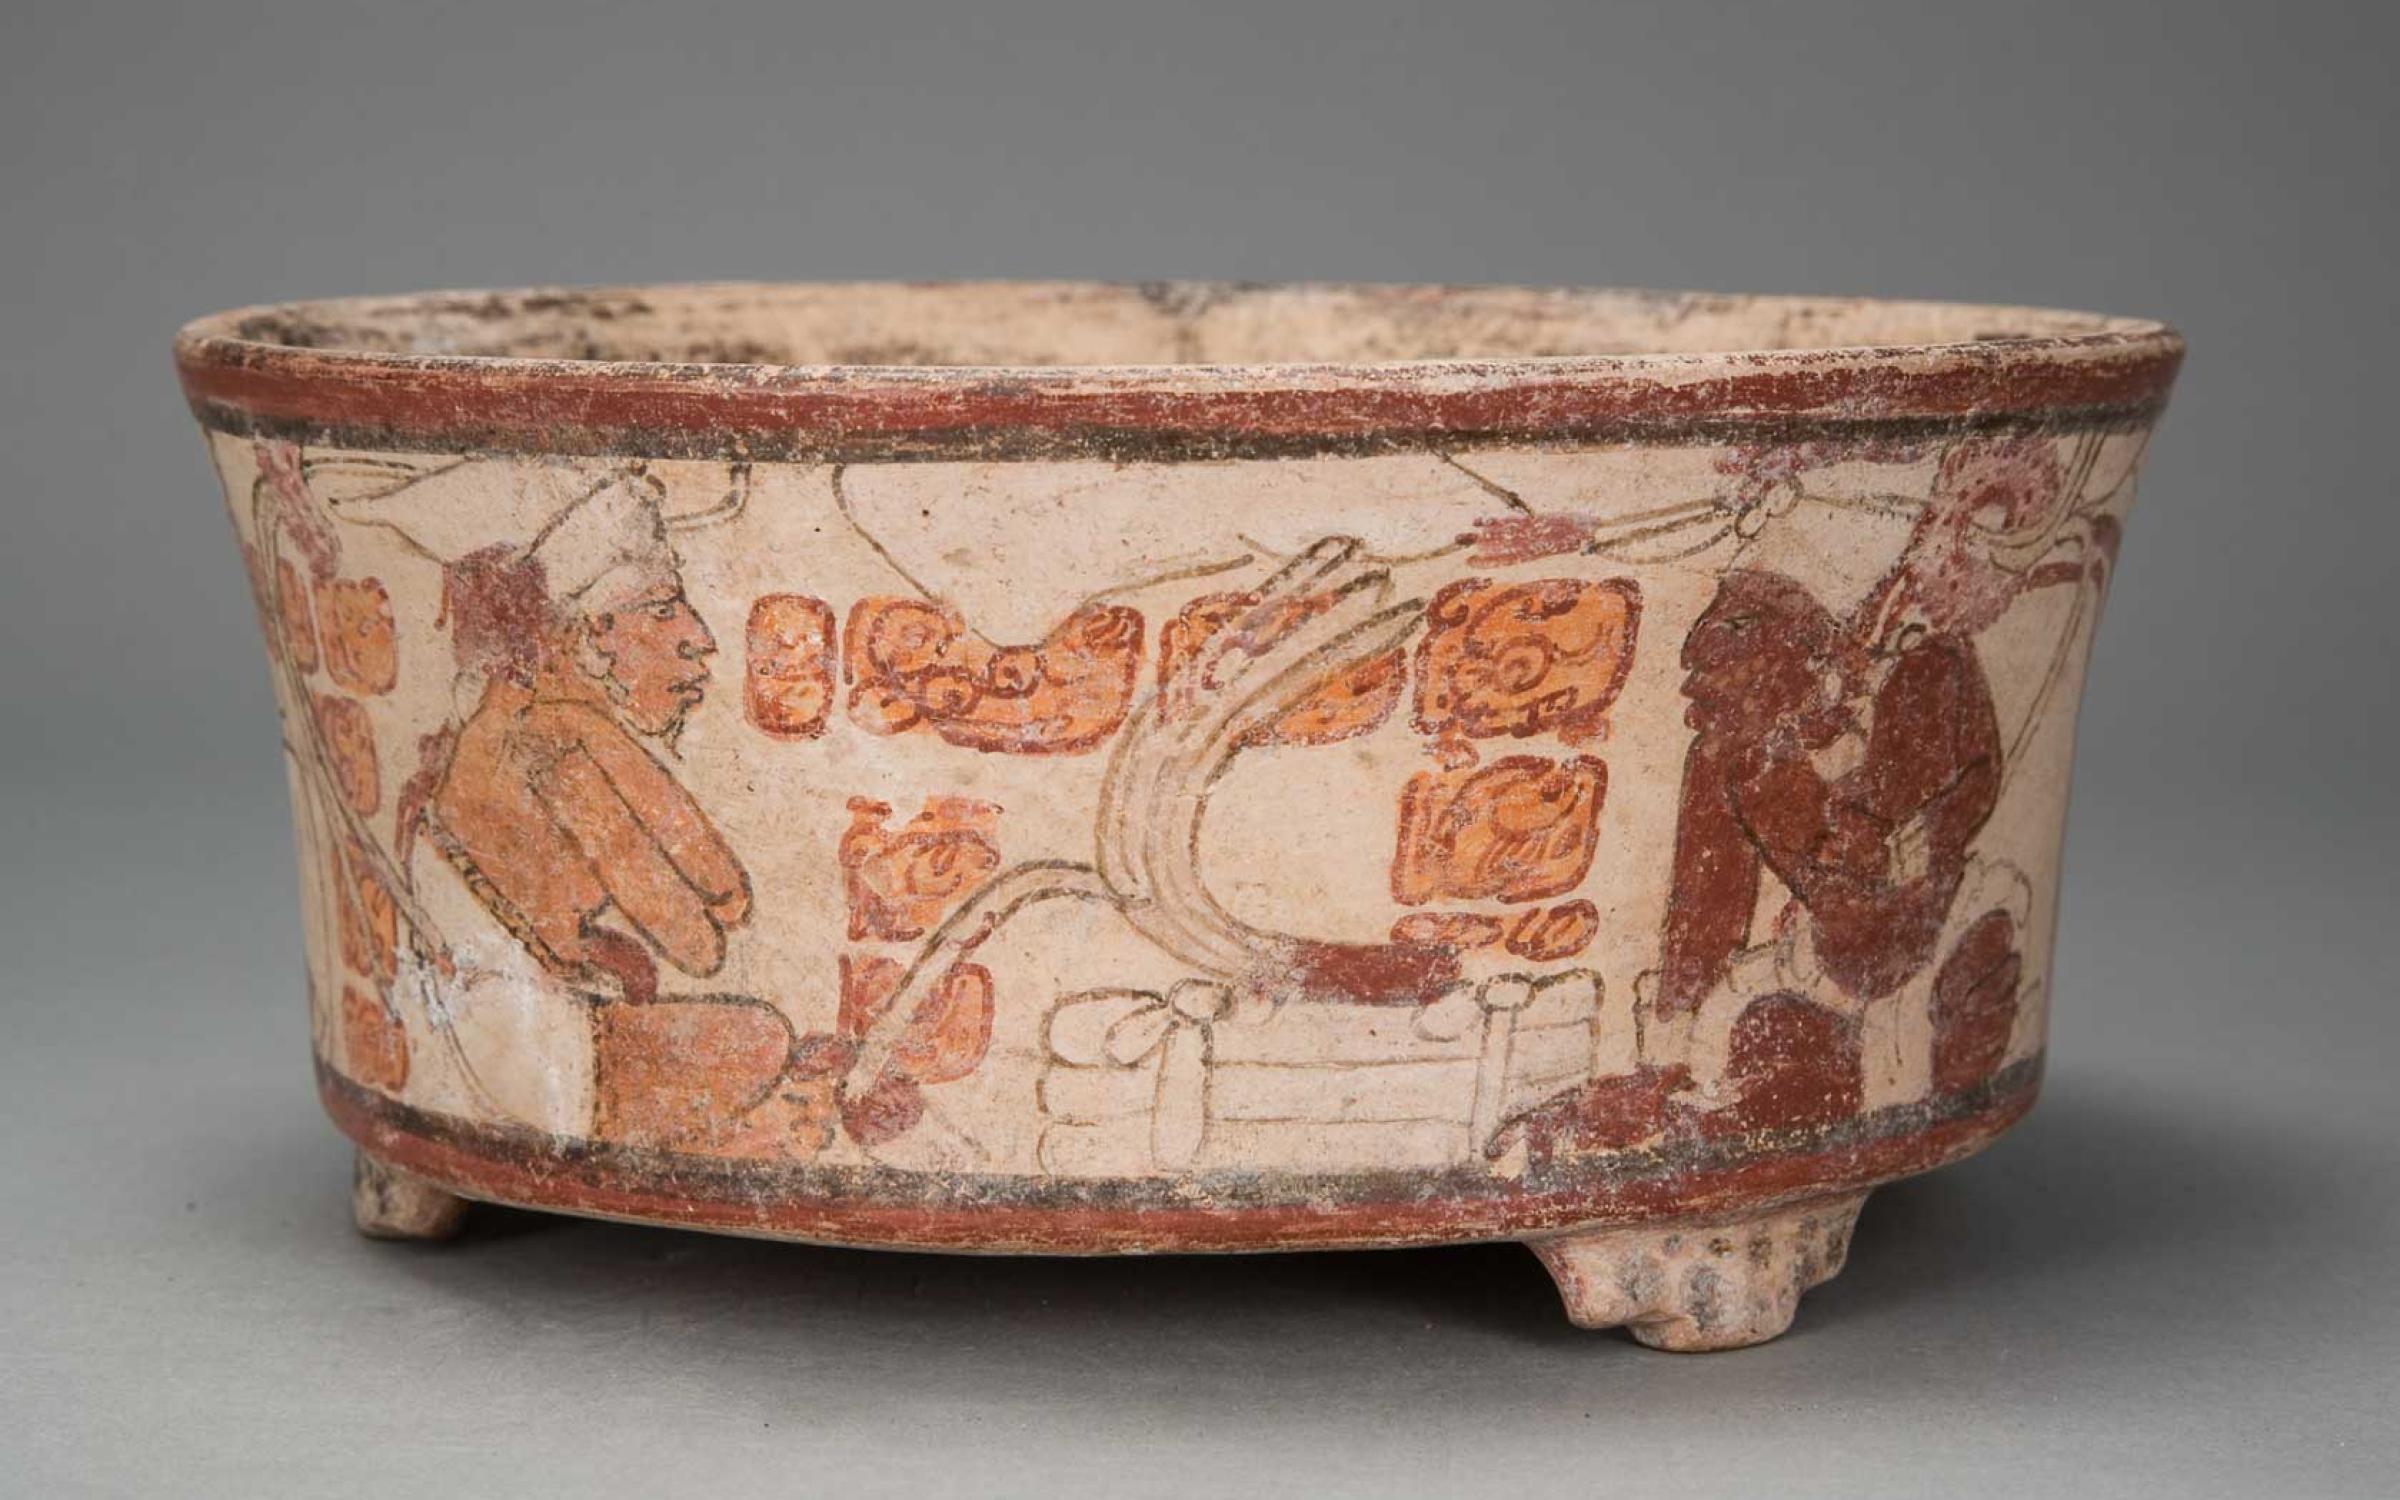 Vessel with Political Scene, Guatemala, Petén region, Maya culture, 600–900, earthenware and pigment, purchased with funds from Friends of the Art Museum, UMFA1984.002.